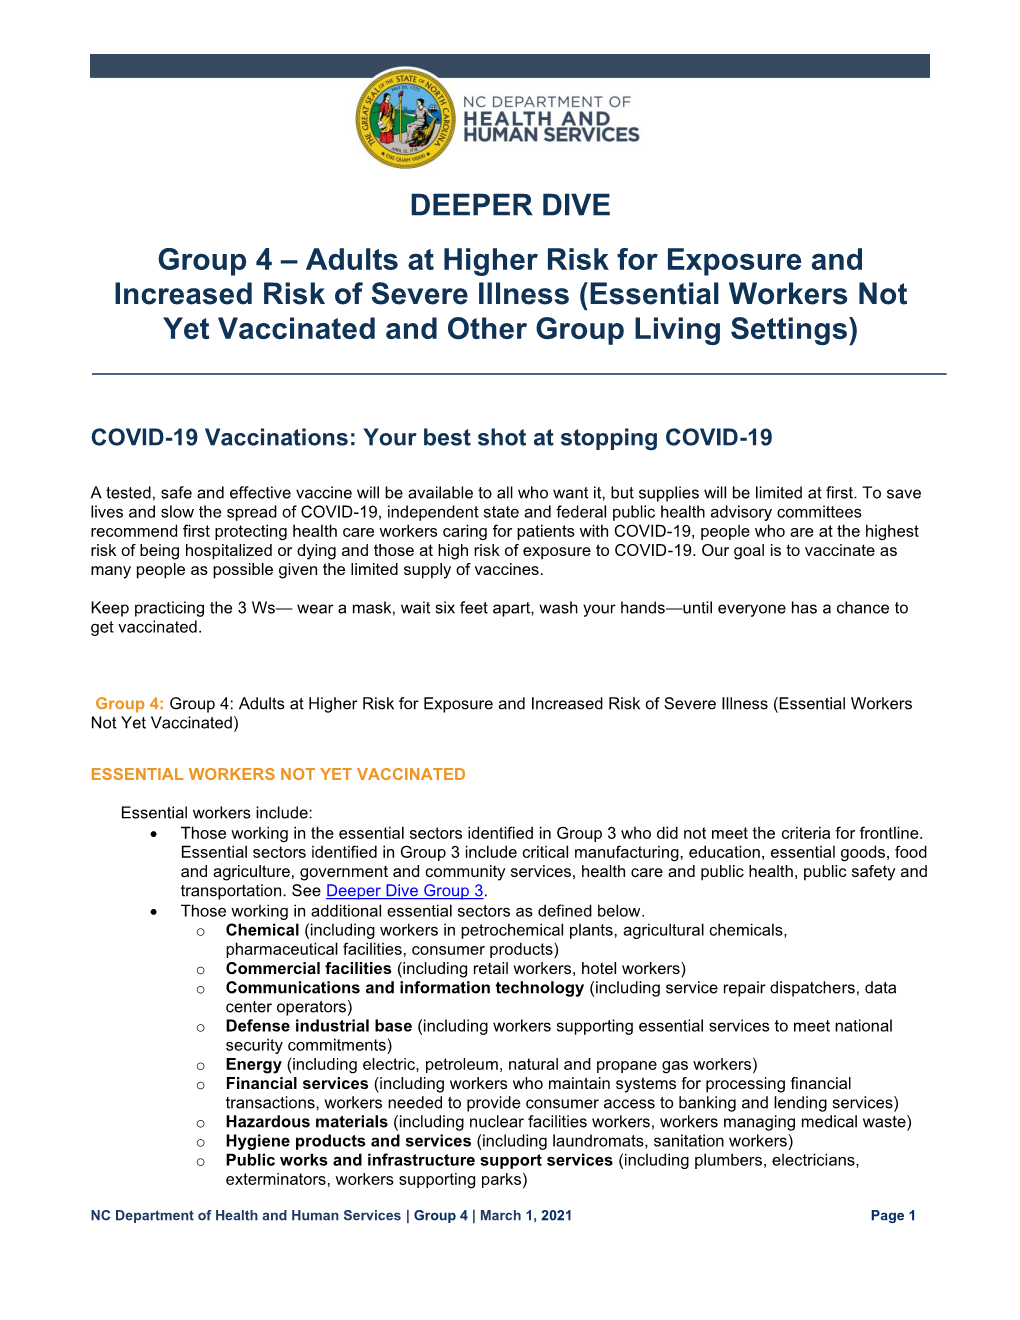 DEEPER DIVE Group 4 – Adults at Higher Risk for Exposure and Increased Risk of Severe Illness (Essential Workers Not Yet Vaccinated and Other Group Living Settings)